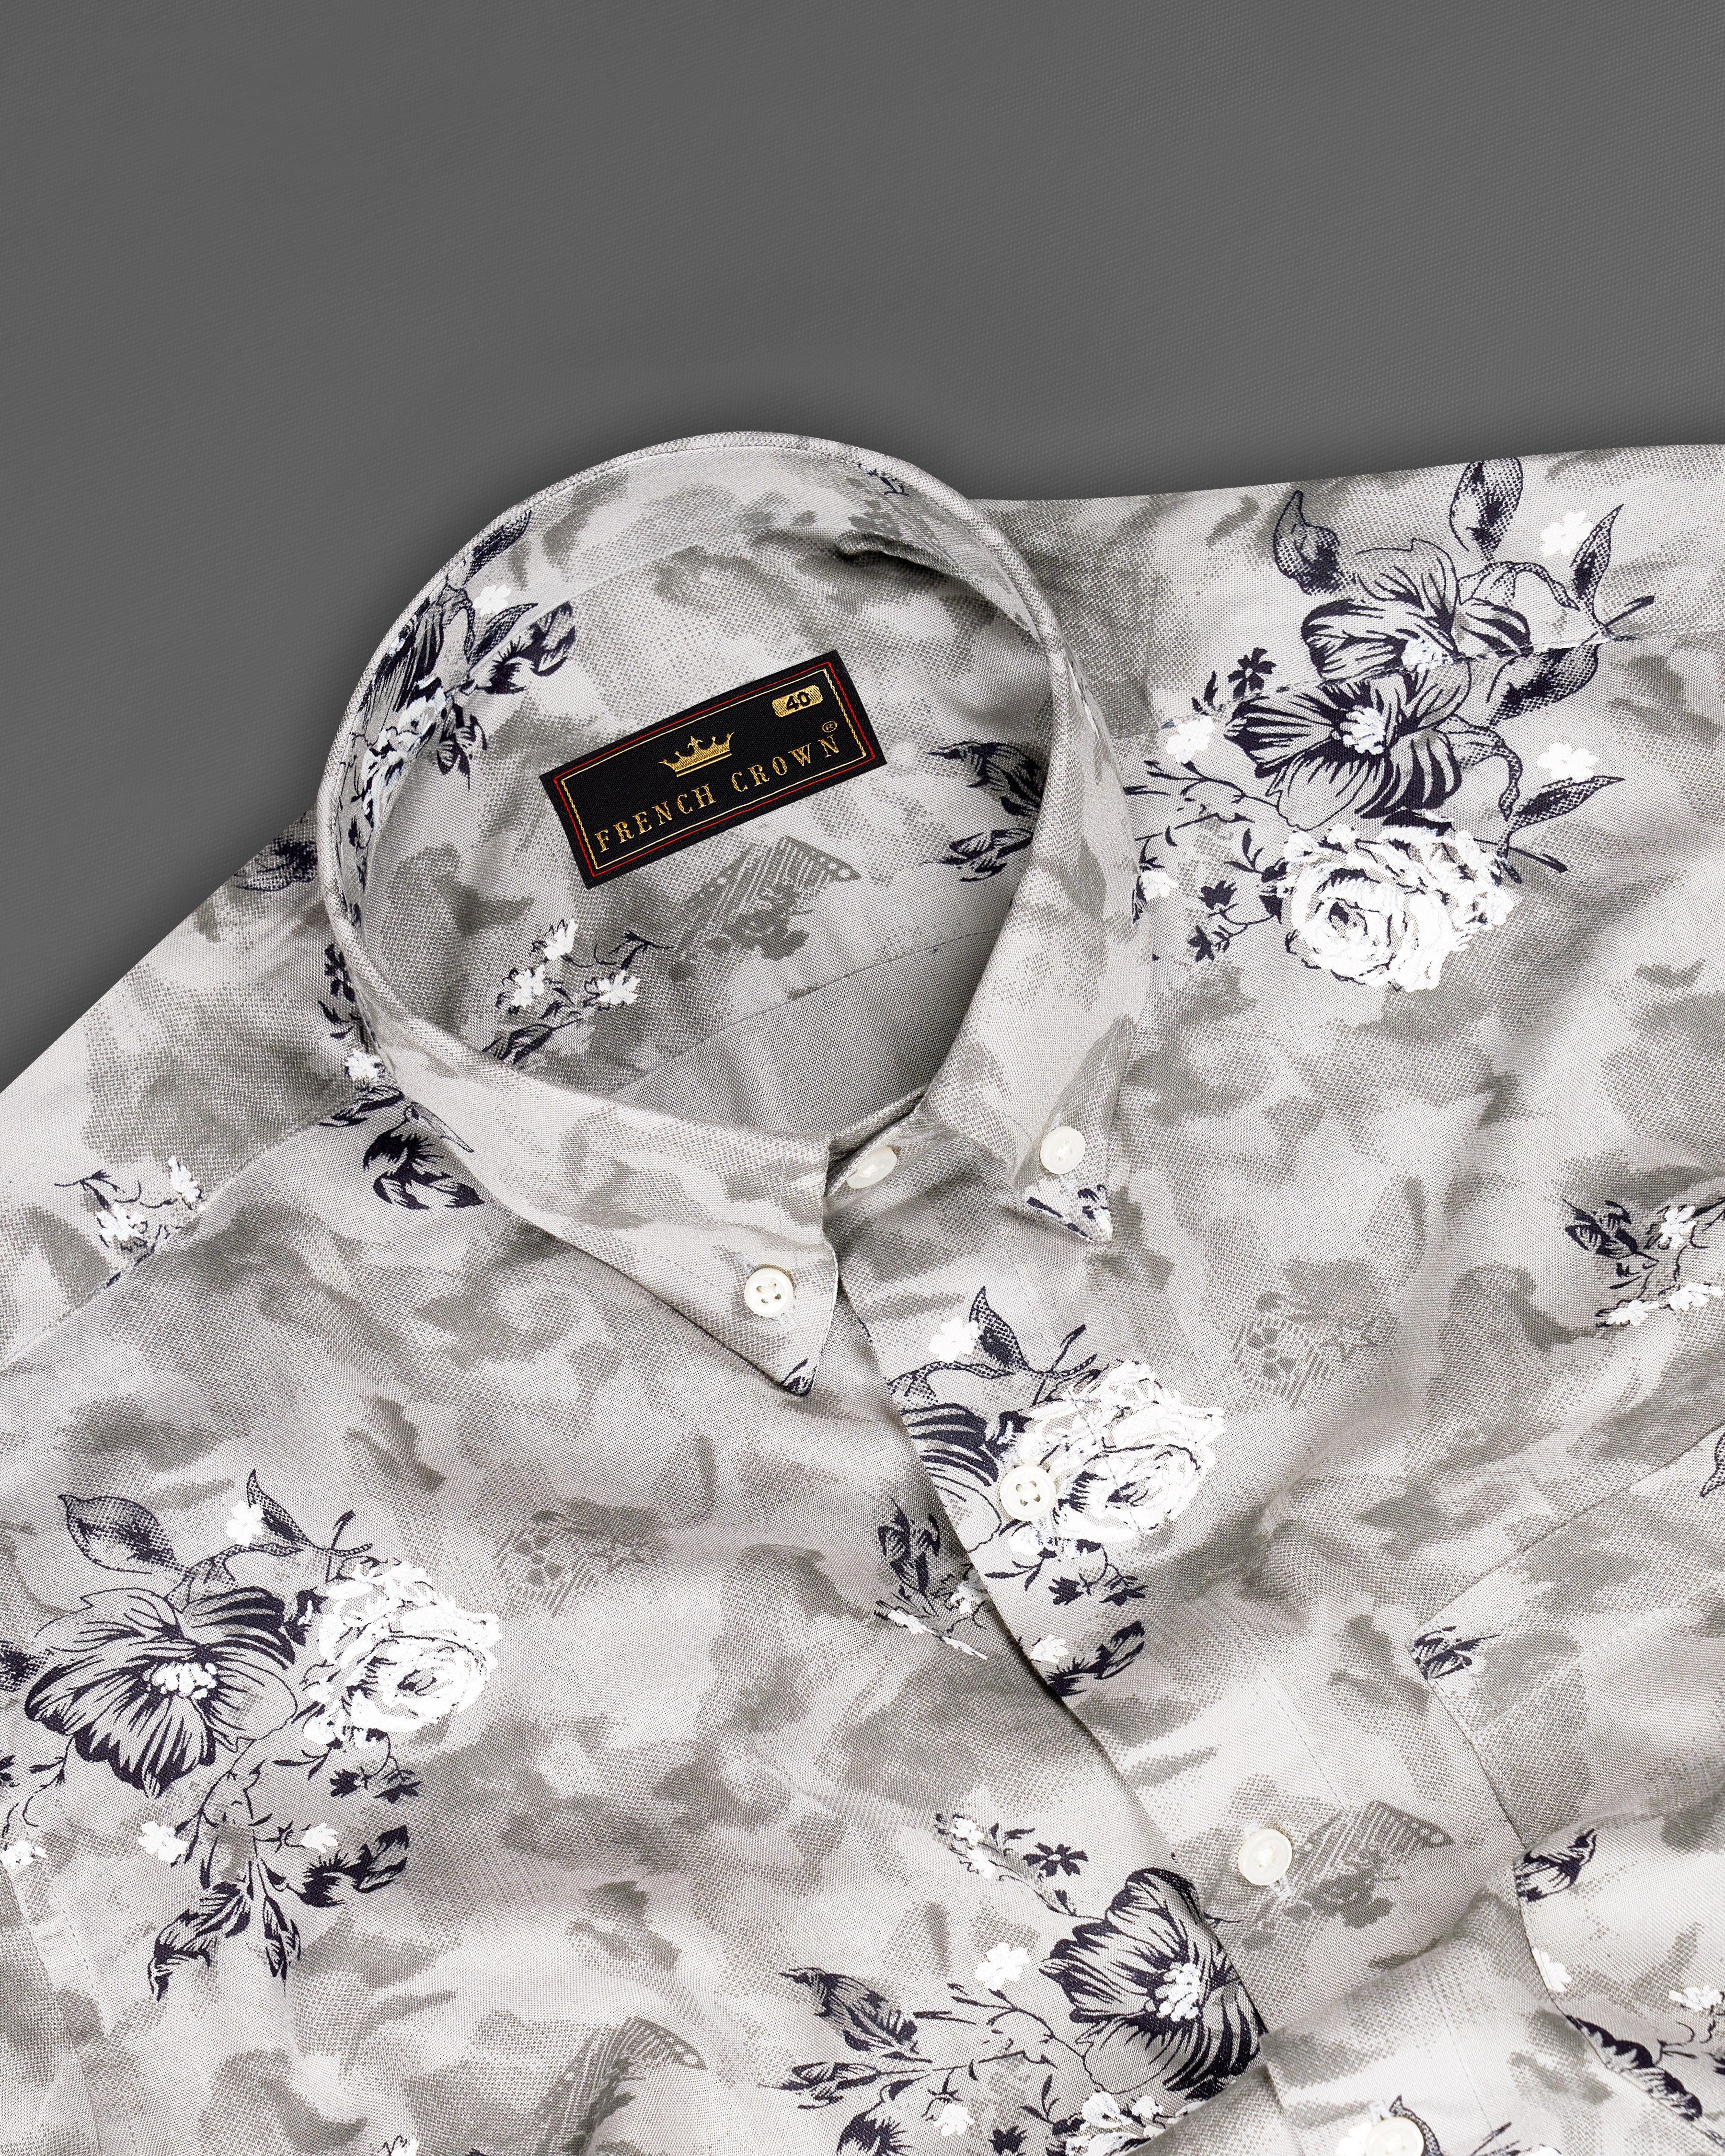 Quill Gray with Floral Printed Premium Tencel Shirt 9208-BD-38,9208-BD-H-38,9208-BD-39,9208-BD-H-39,9208-BD-40,9208-BD-H-40,9208-BD-42,9208-BD-H-42,9208-BD-44,9208-BD-H-44,9208-BD-46,9208-BD-H-46,9208-BD-48,9208-BD-H-48,9208-BD-50,9208-BD-H-50,9208-BD-52,9208-BD-H-52